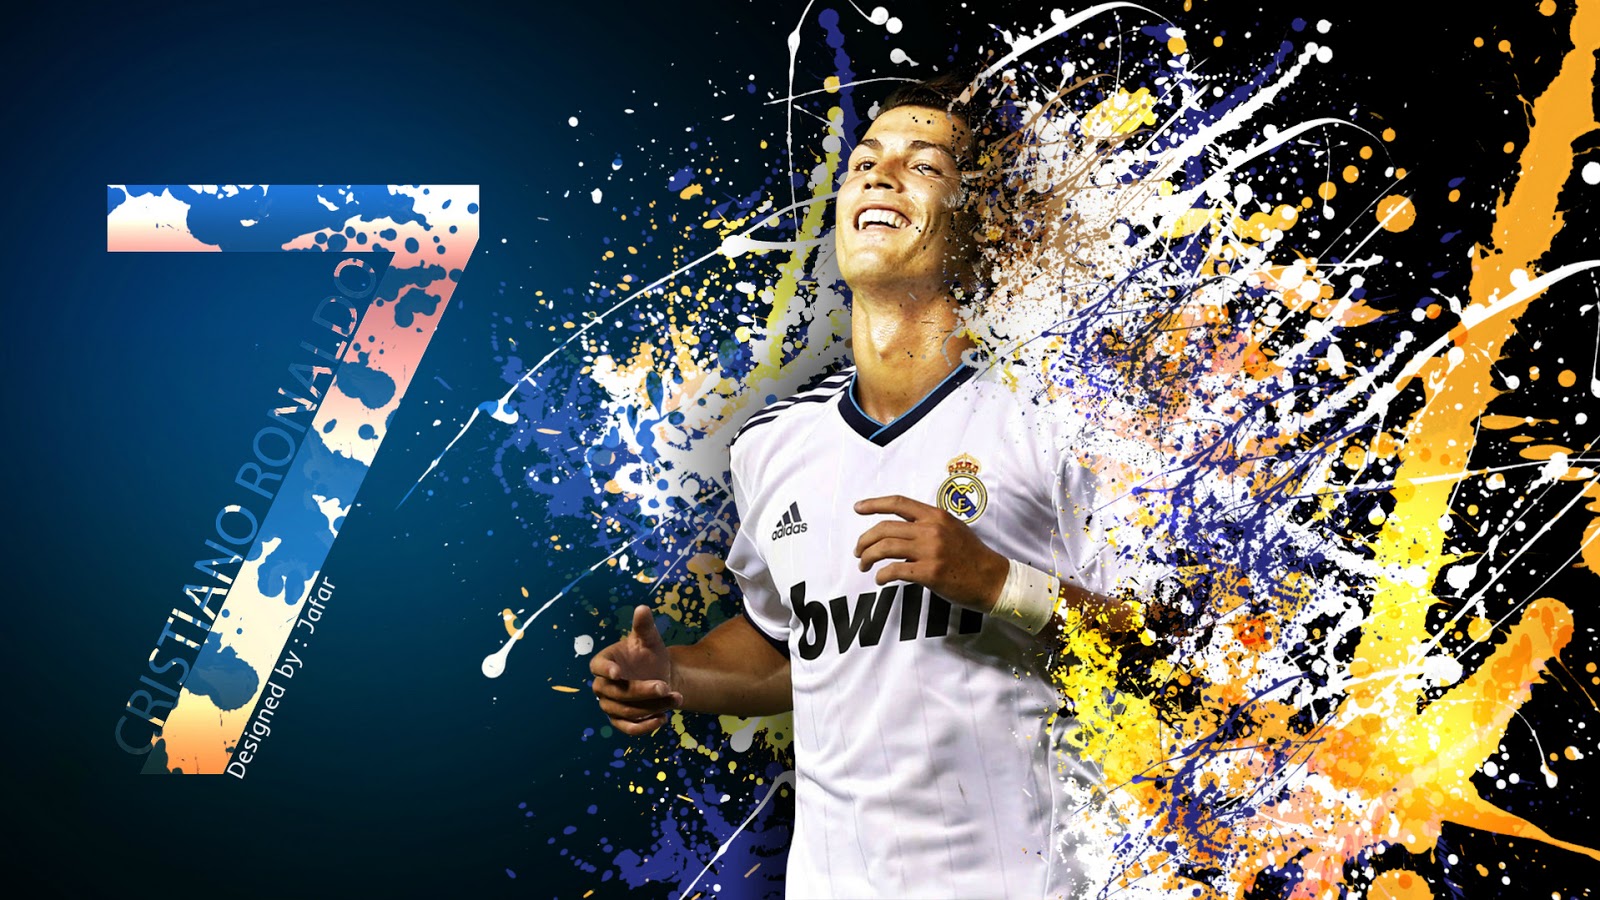 Free Download All Sports Players Cristiano Ronaldo Hd Wallpapers 2013